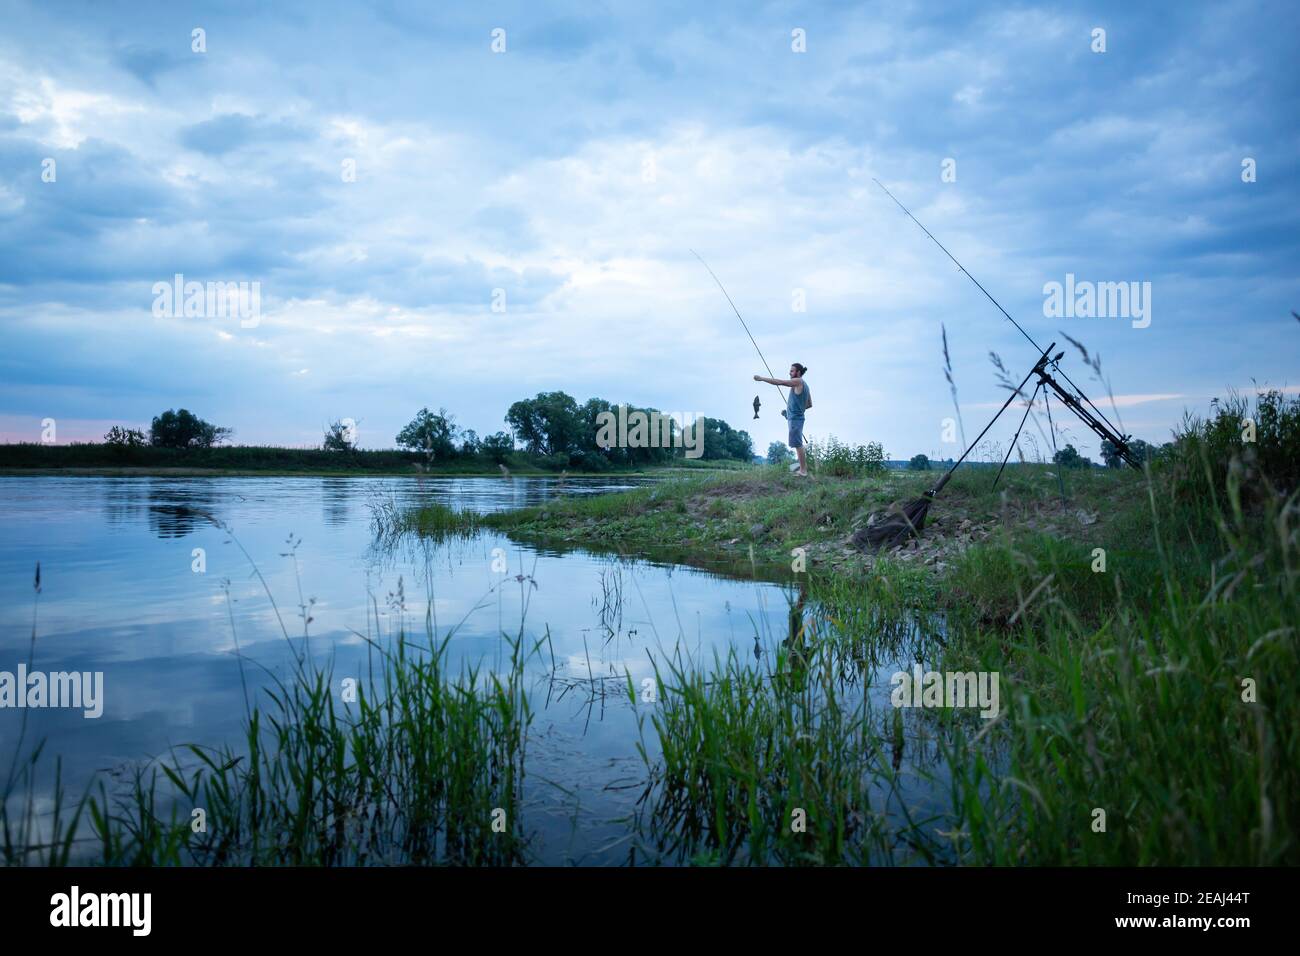 Angler on a river bank caught a fish Stock Photo